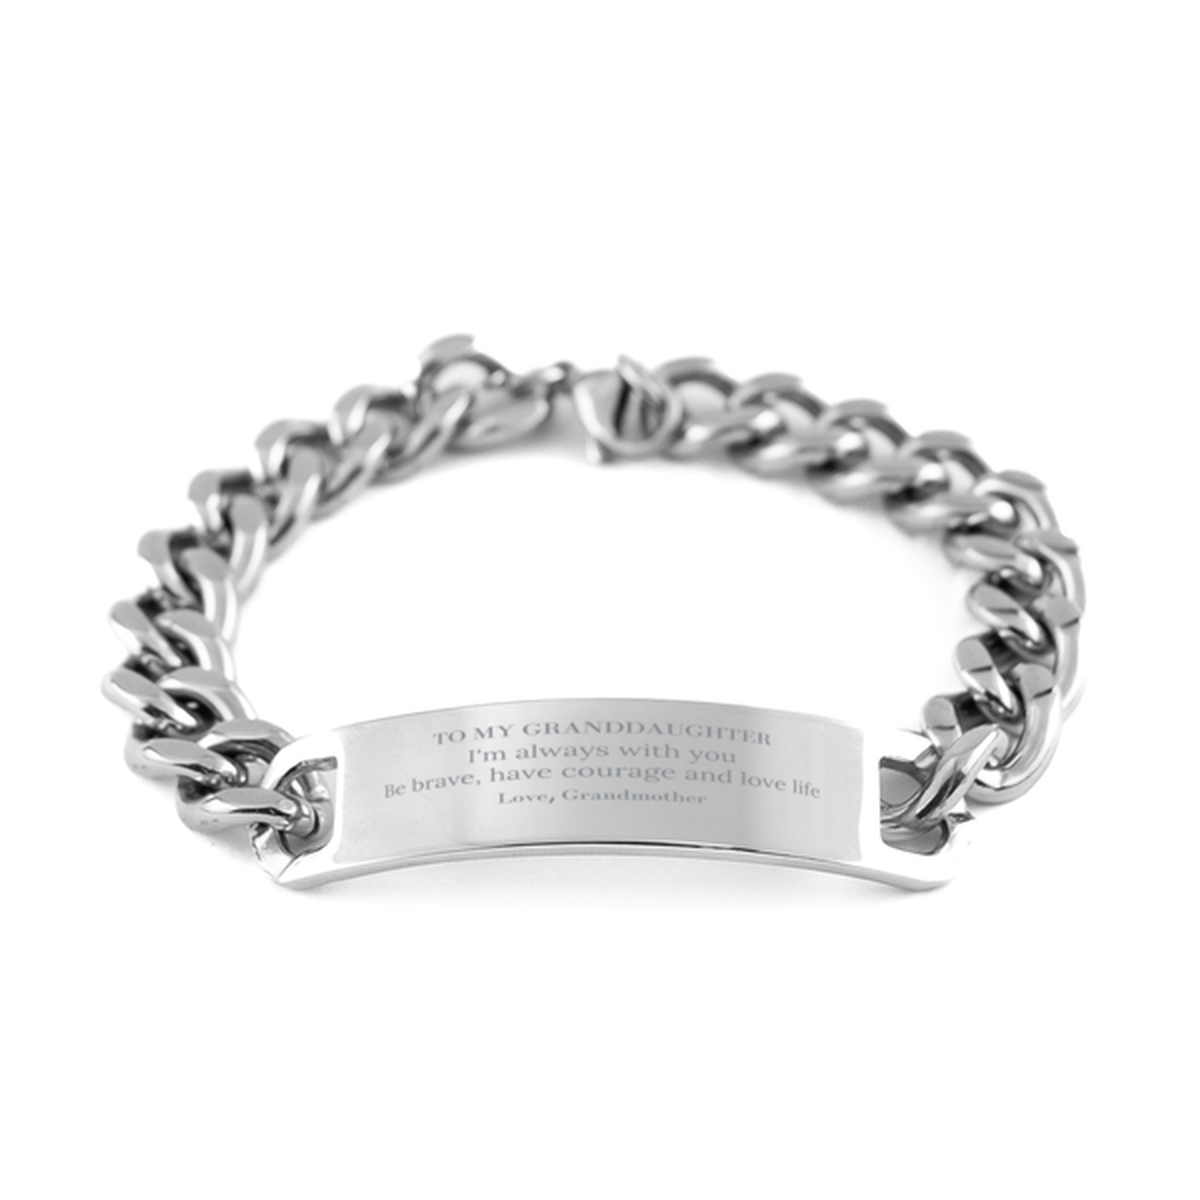 To My Granddaughter Gifts from Grandmother, Unique Cuban Chain Stainless Steel Bracelet Inspirational Christmas Birthday Graduation Gifts for Granddaughter I'm always with you. Be brave, have courage and love life. Love, Grandmother